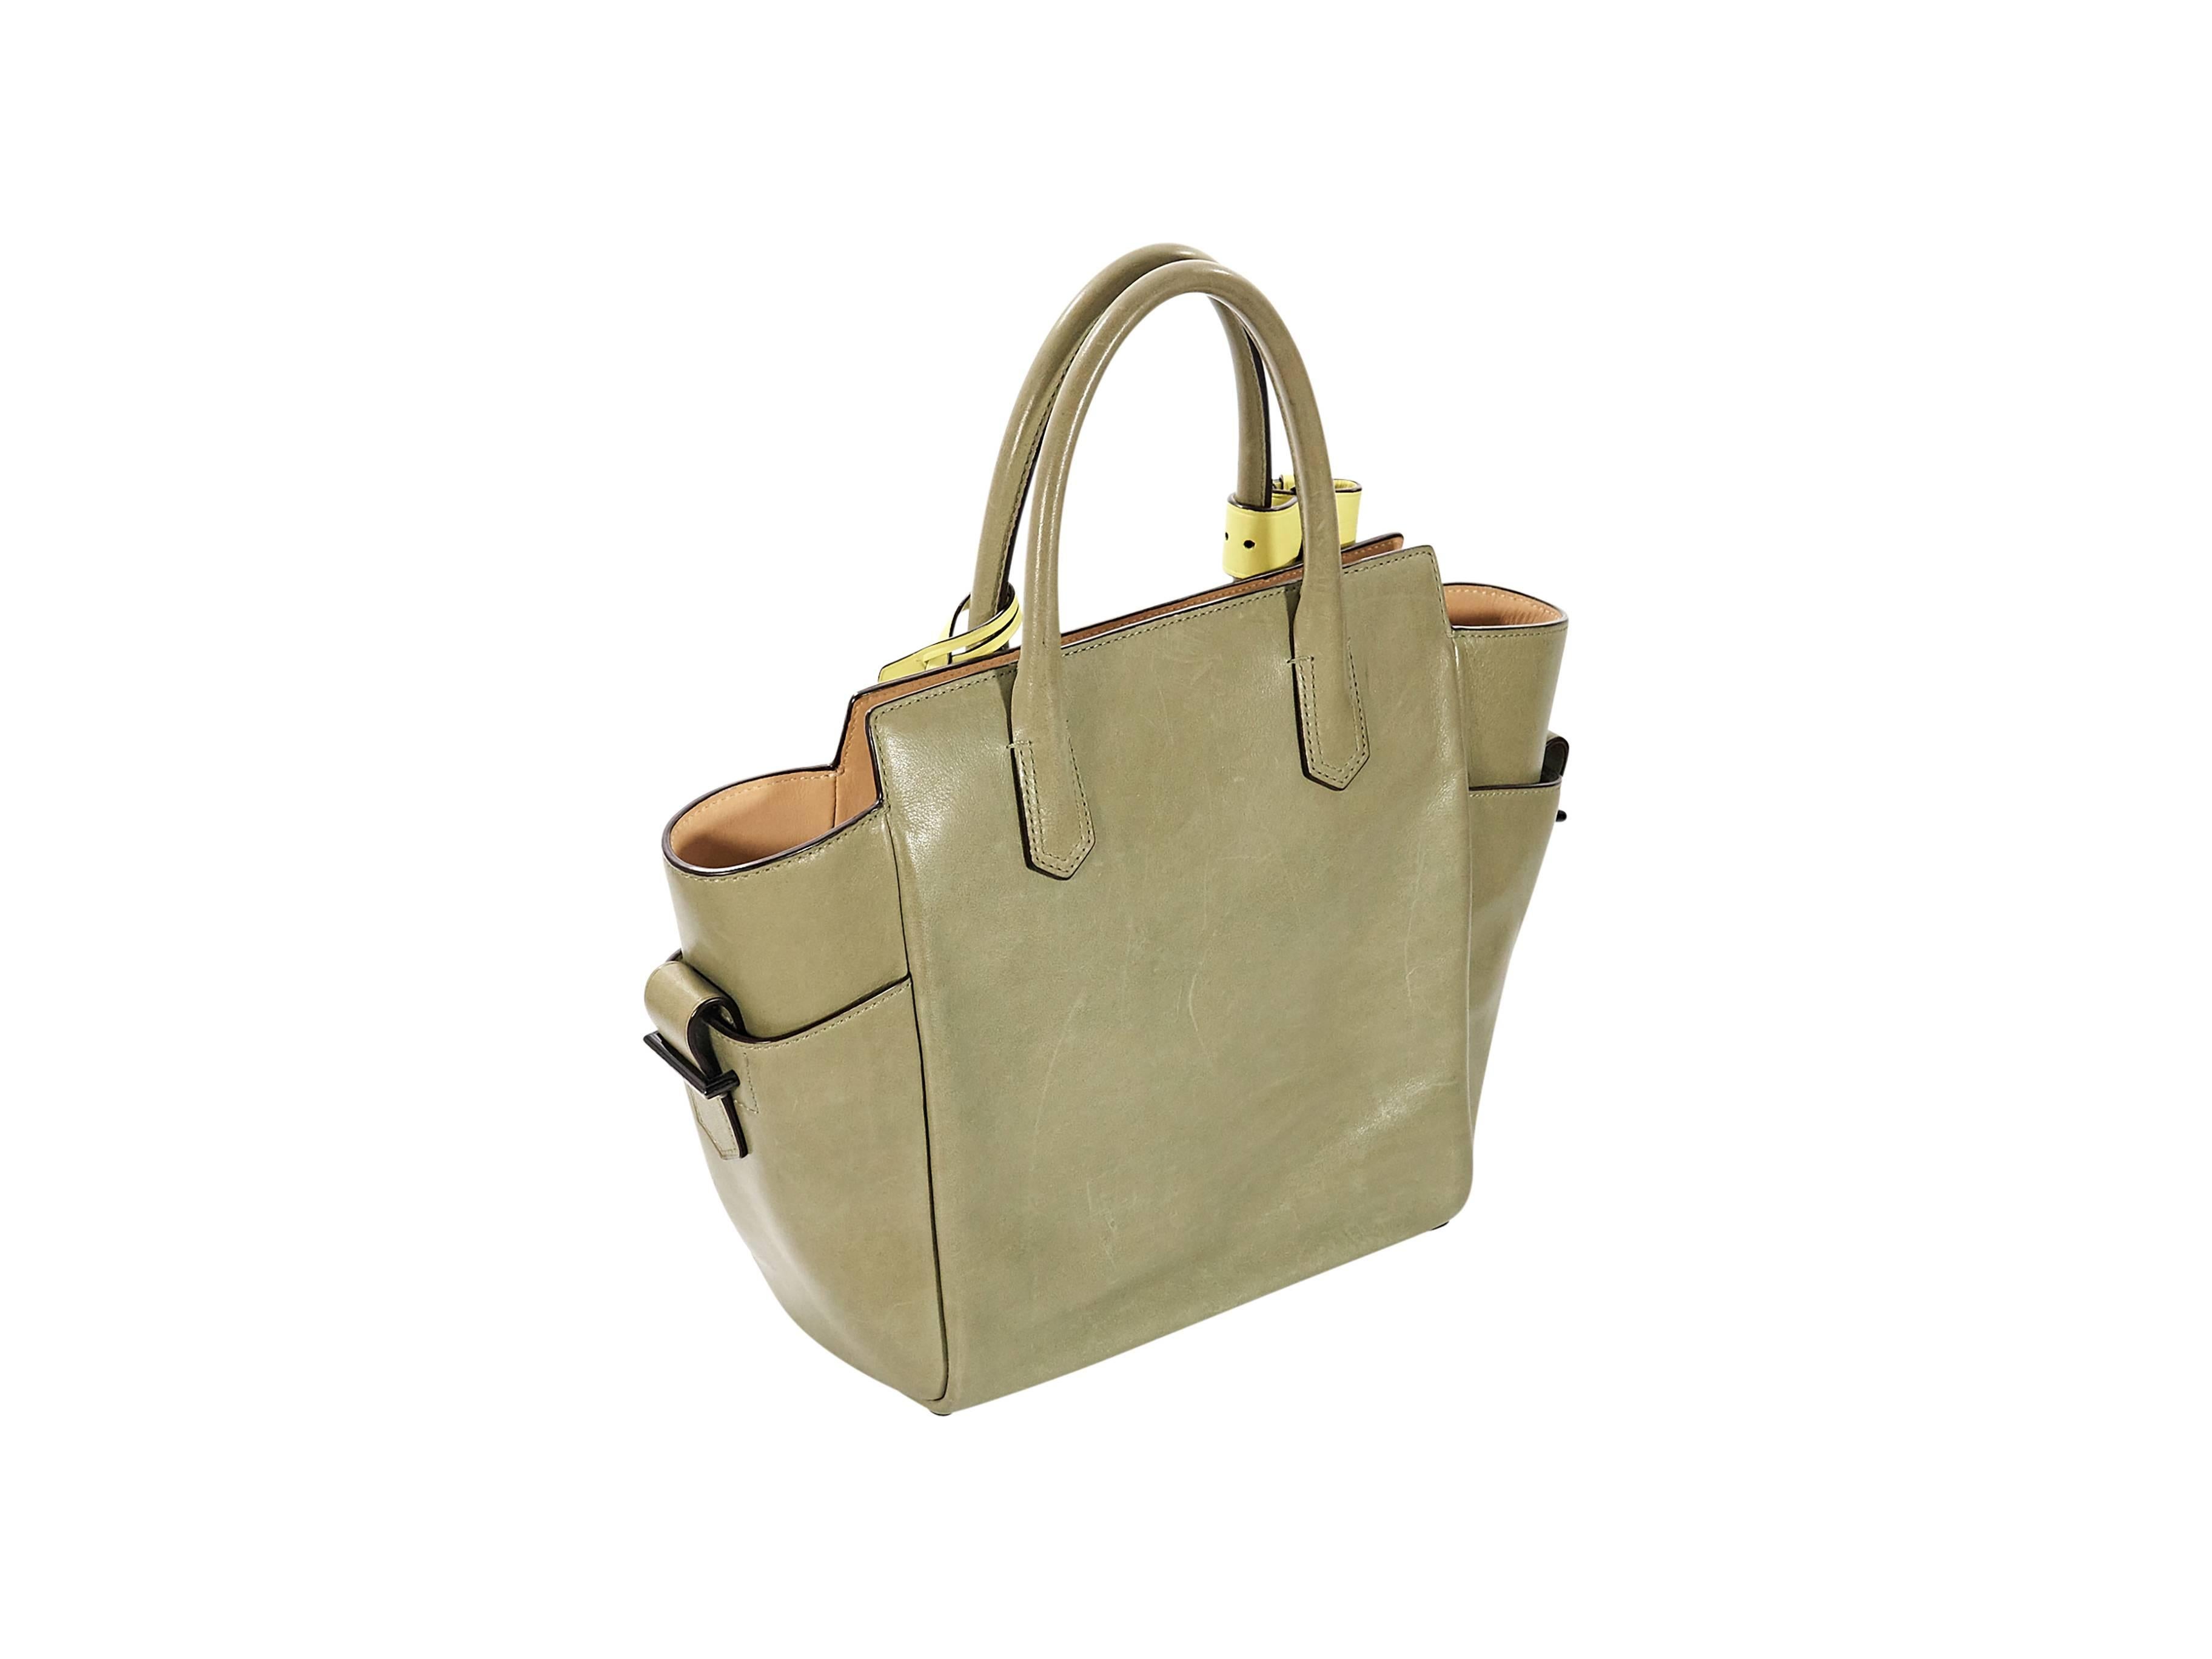 Product details:  Green mini Atlantique leather satchel by Reed Krakoff.  Top carry handles.  Open top.  Front exterior slide pocket.  Lined interior with inner zip pockets.  Side exterior buckle pockets.  14.5